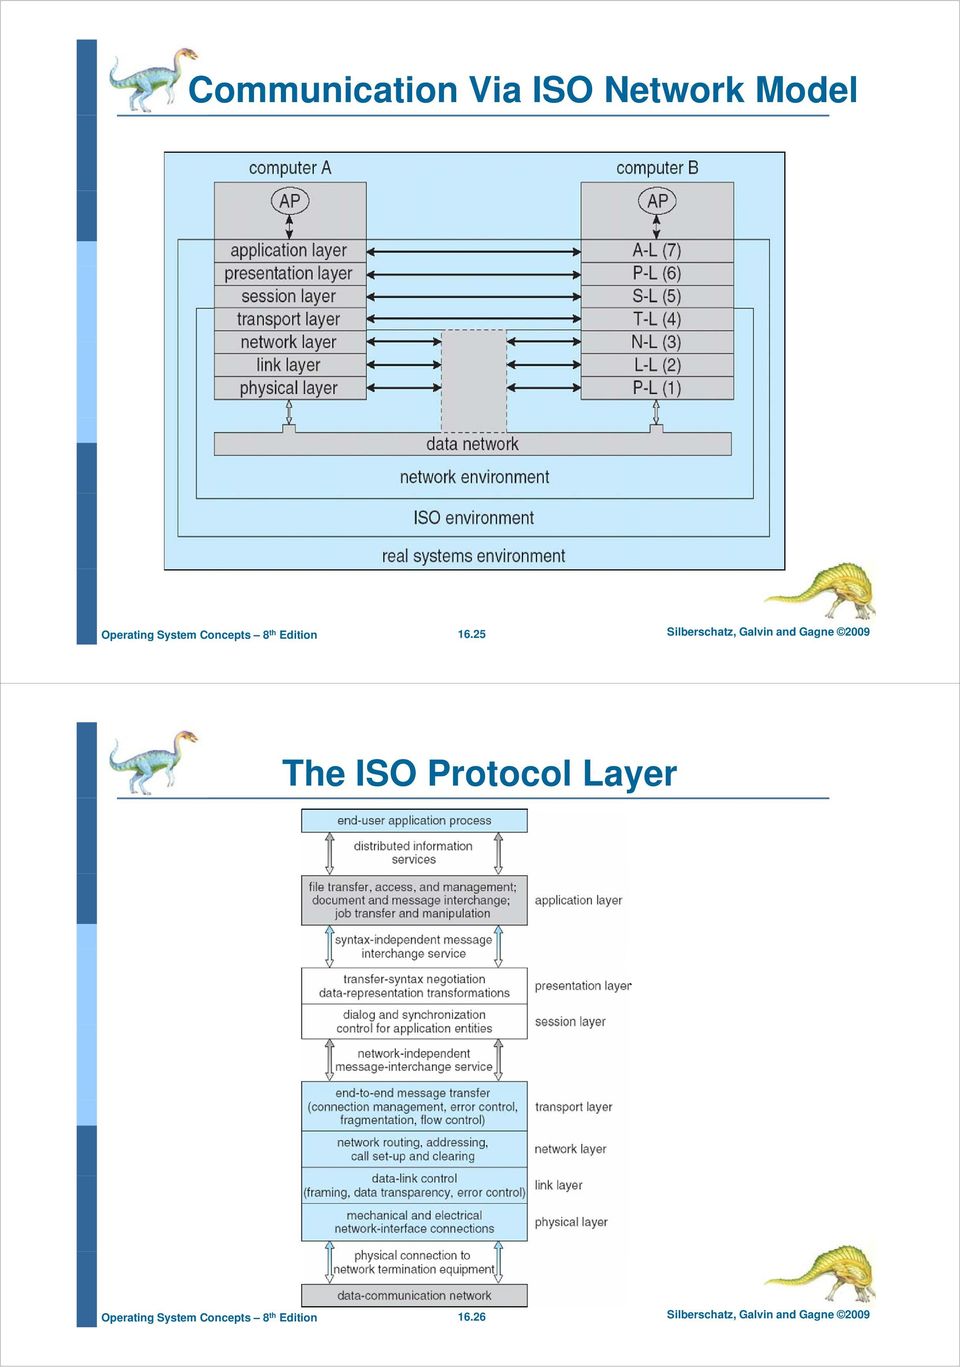 Gagne 2009 The ISO Protocol Layer